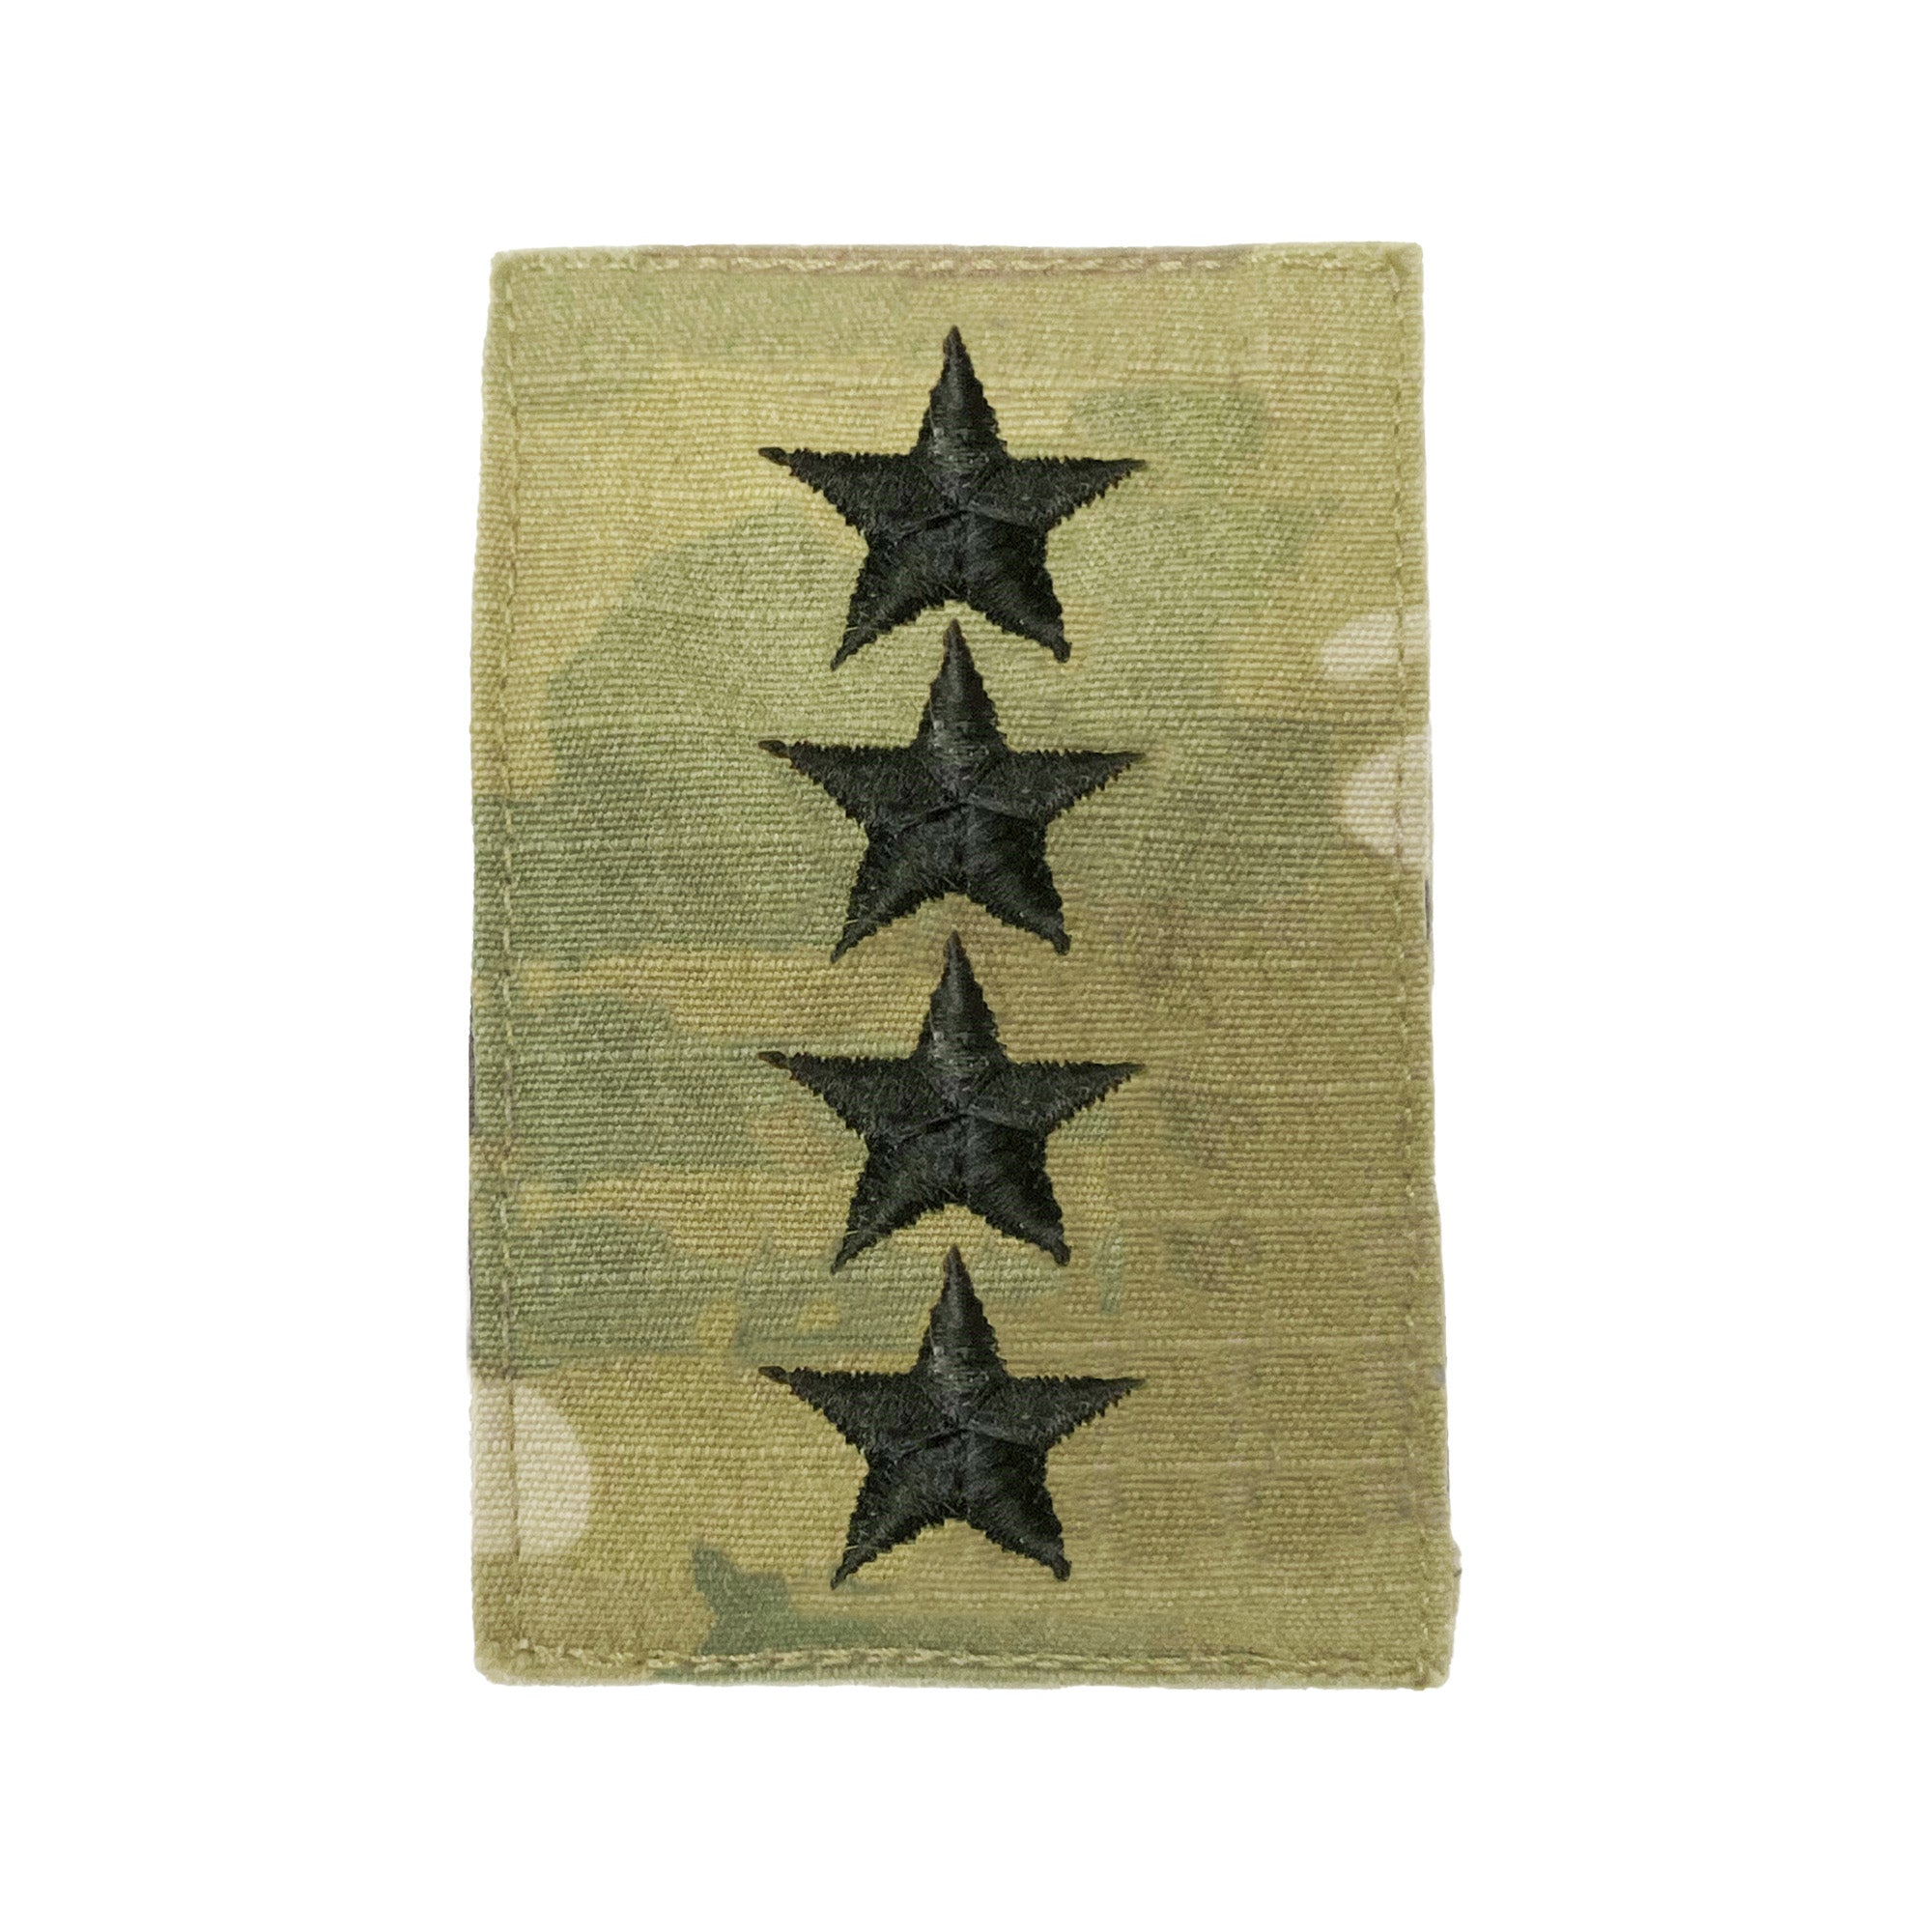 O10 General OCP with Hook Fastener - Insignia Depot